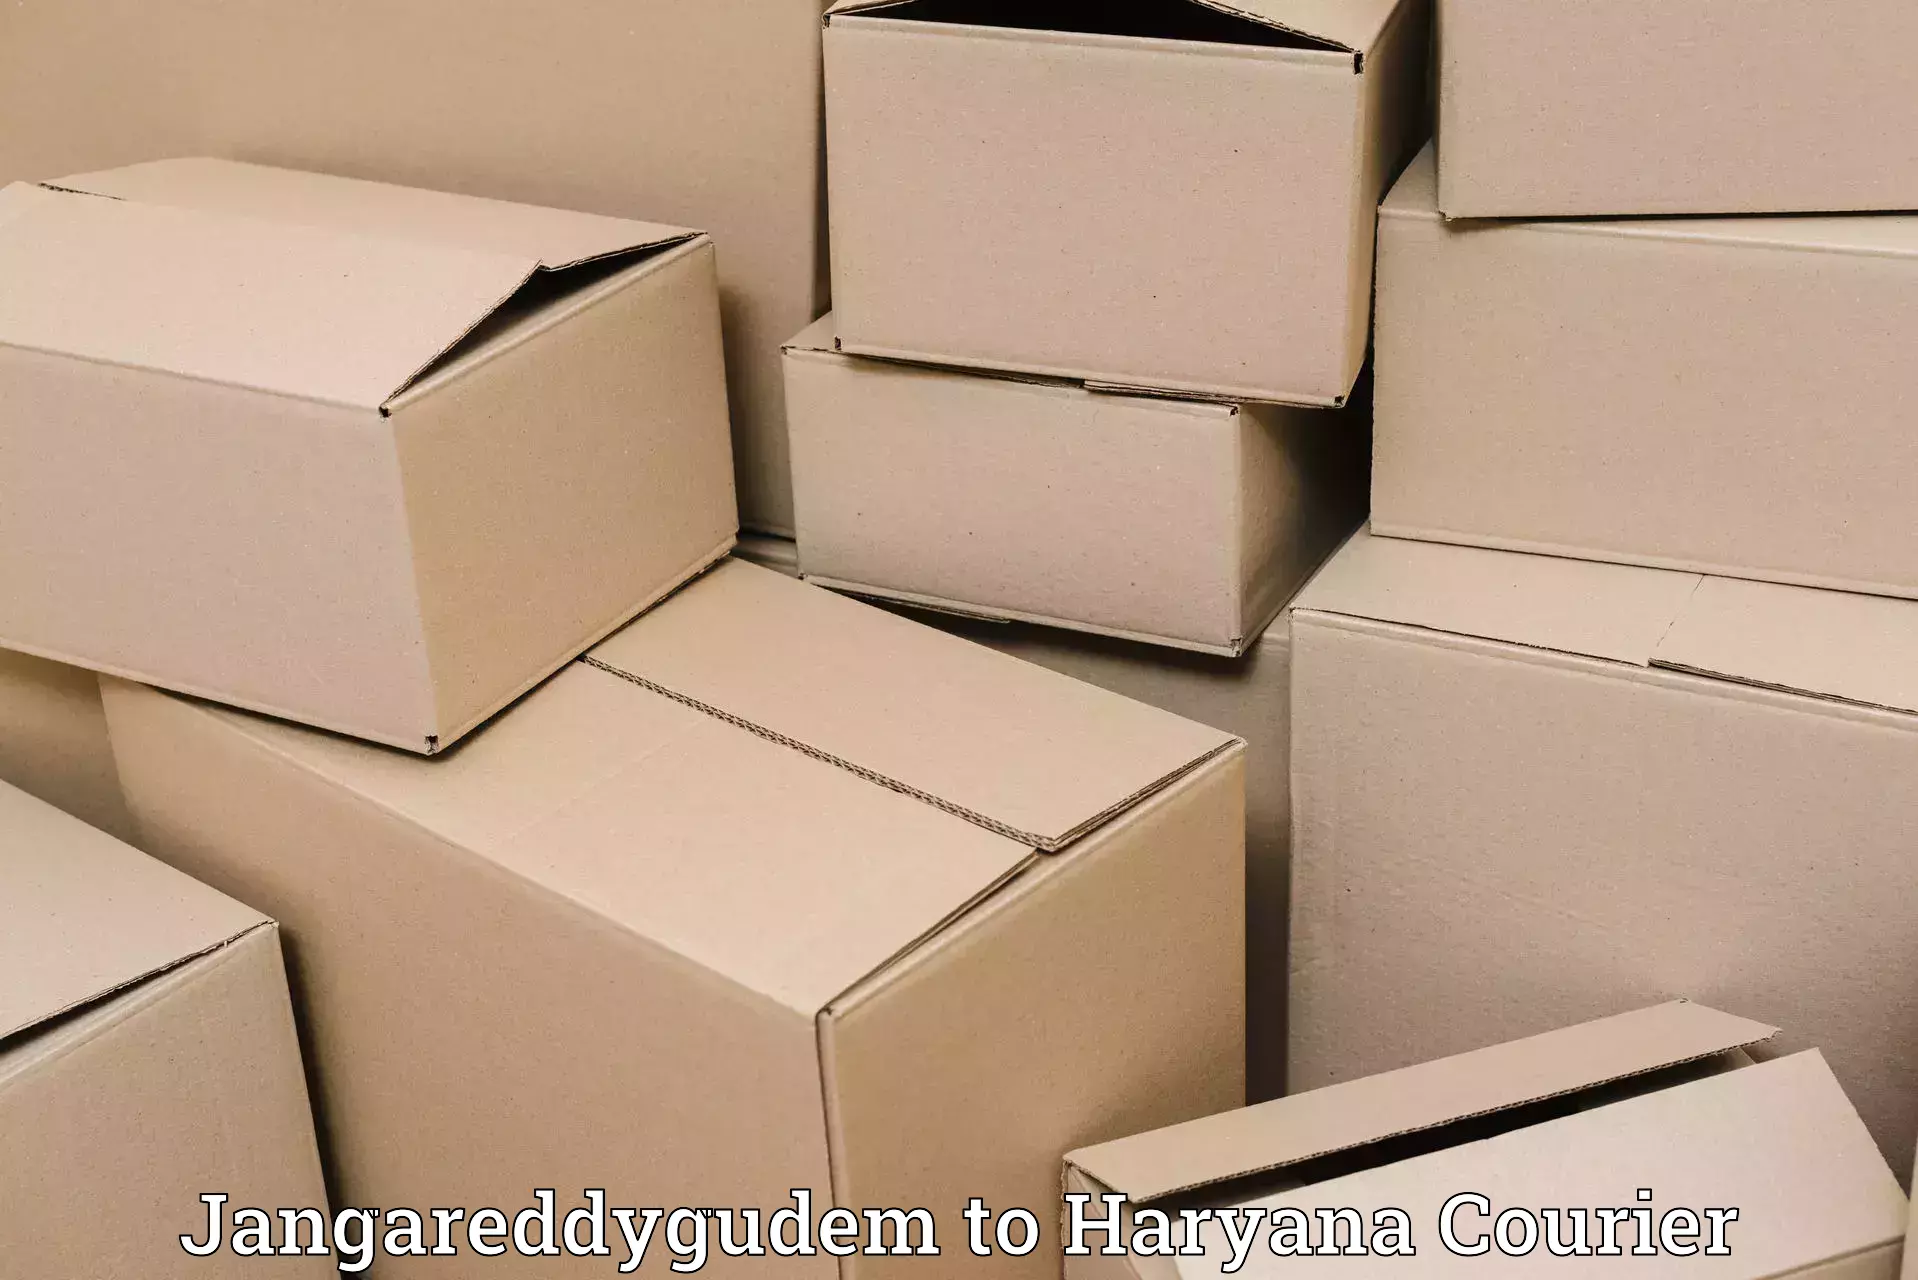 Holiday shipping services Jangareddygudem to Jind